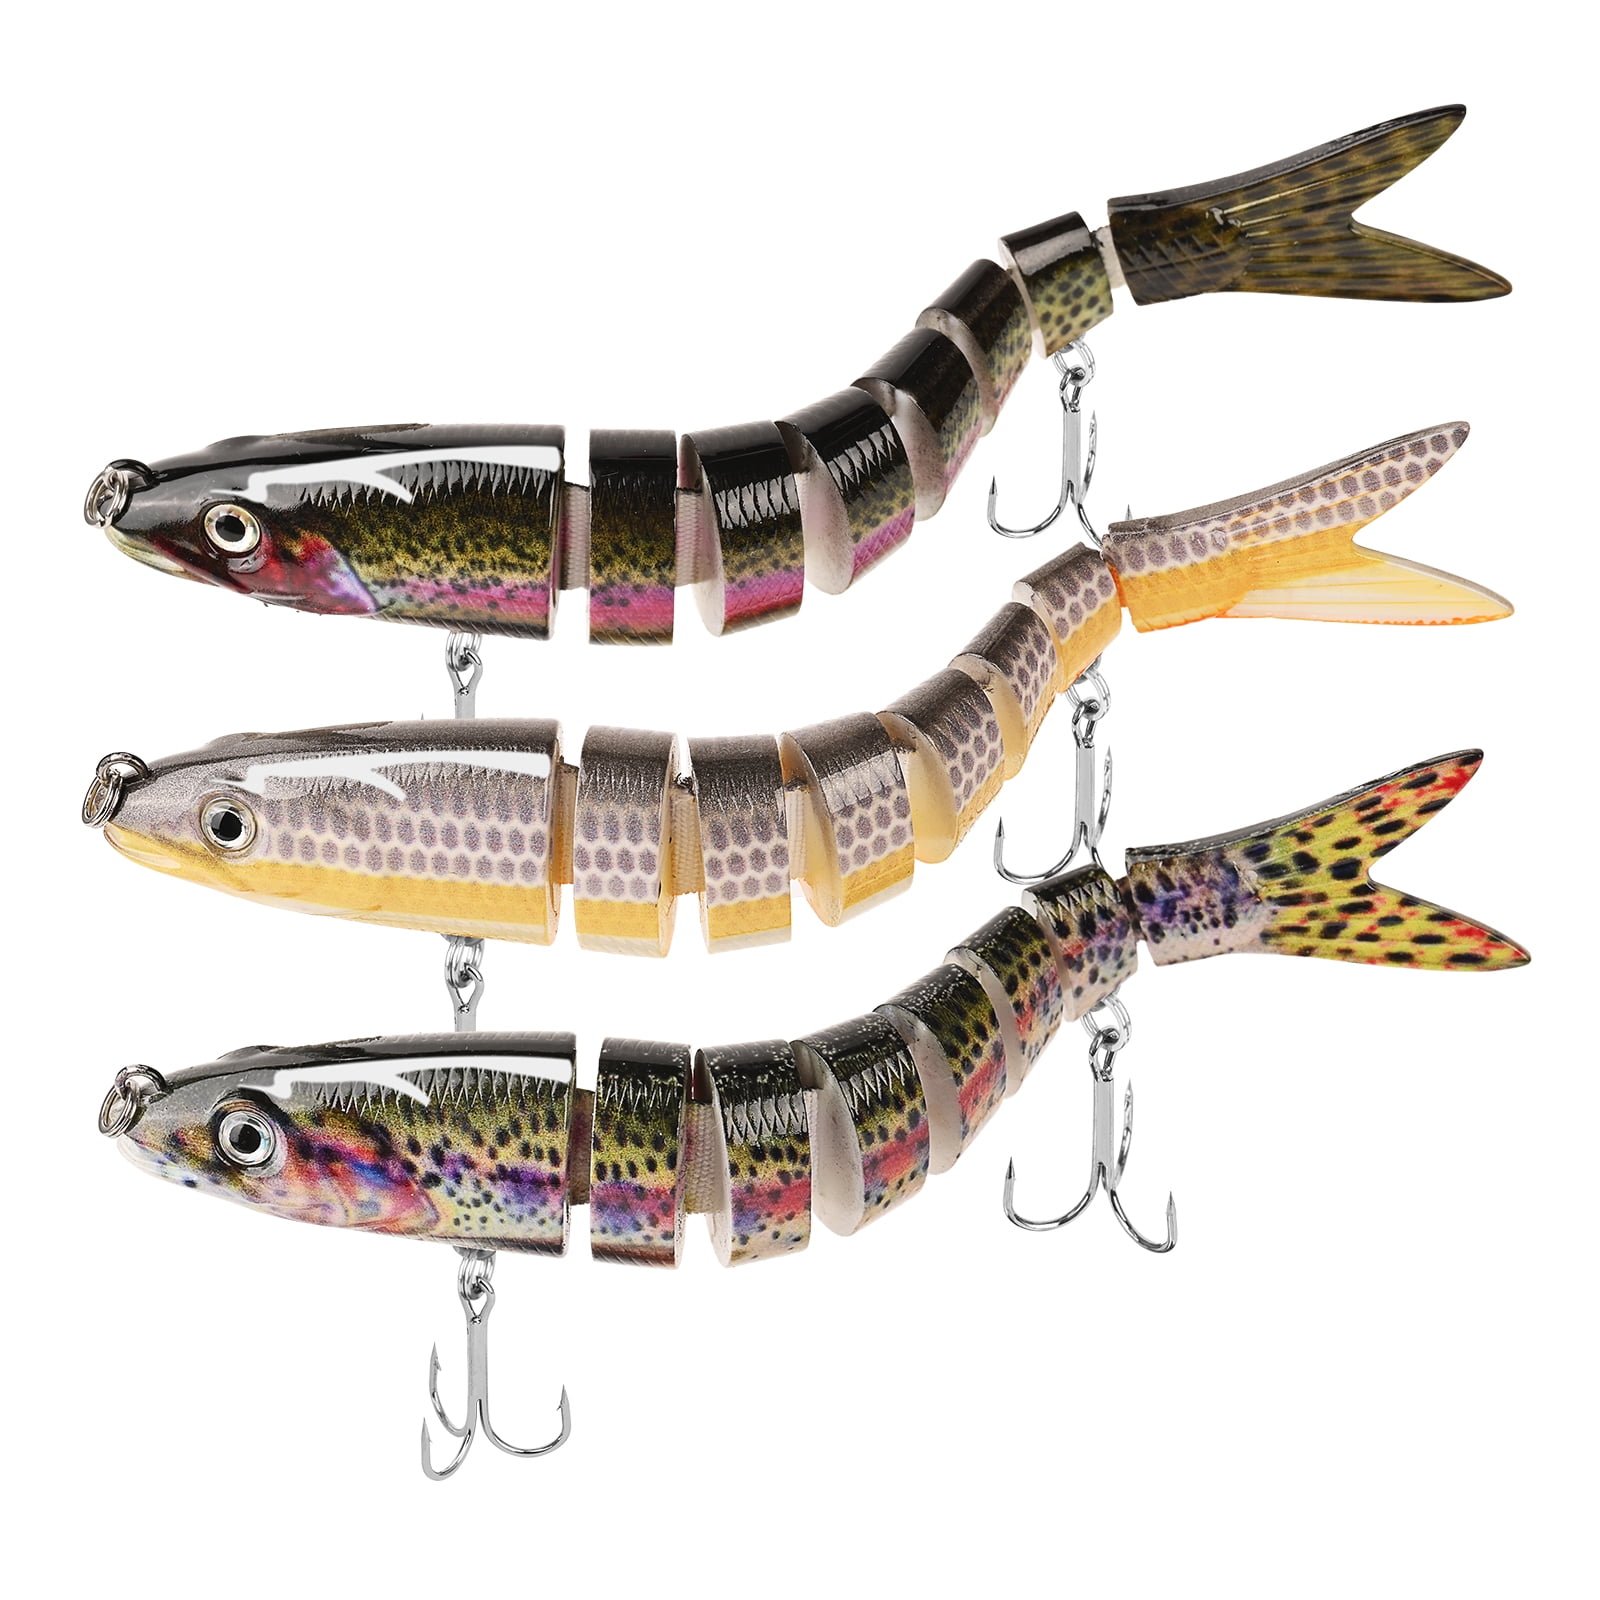 Northern-Pike-Lures-Multi-Jointed-Swimbaits-Fishing-Lure 5 8 inch for Musky Lake Trout Fishing Tackle